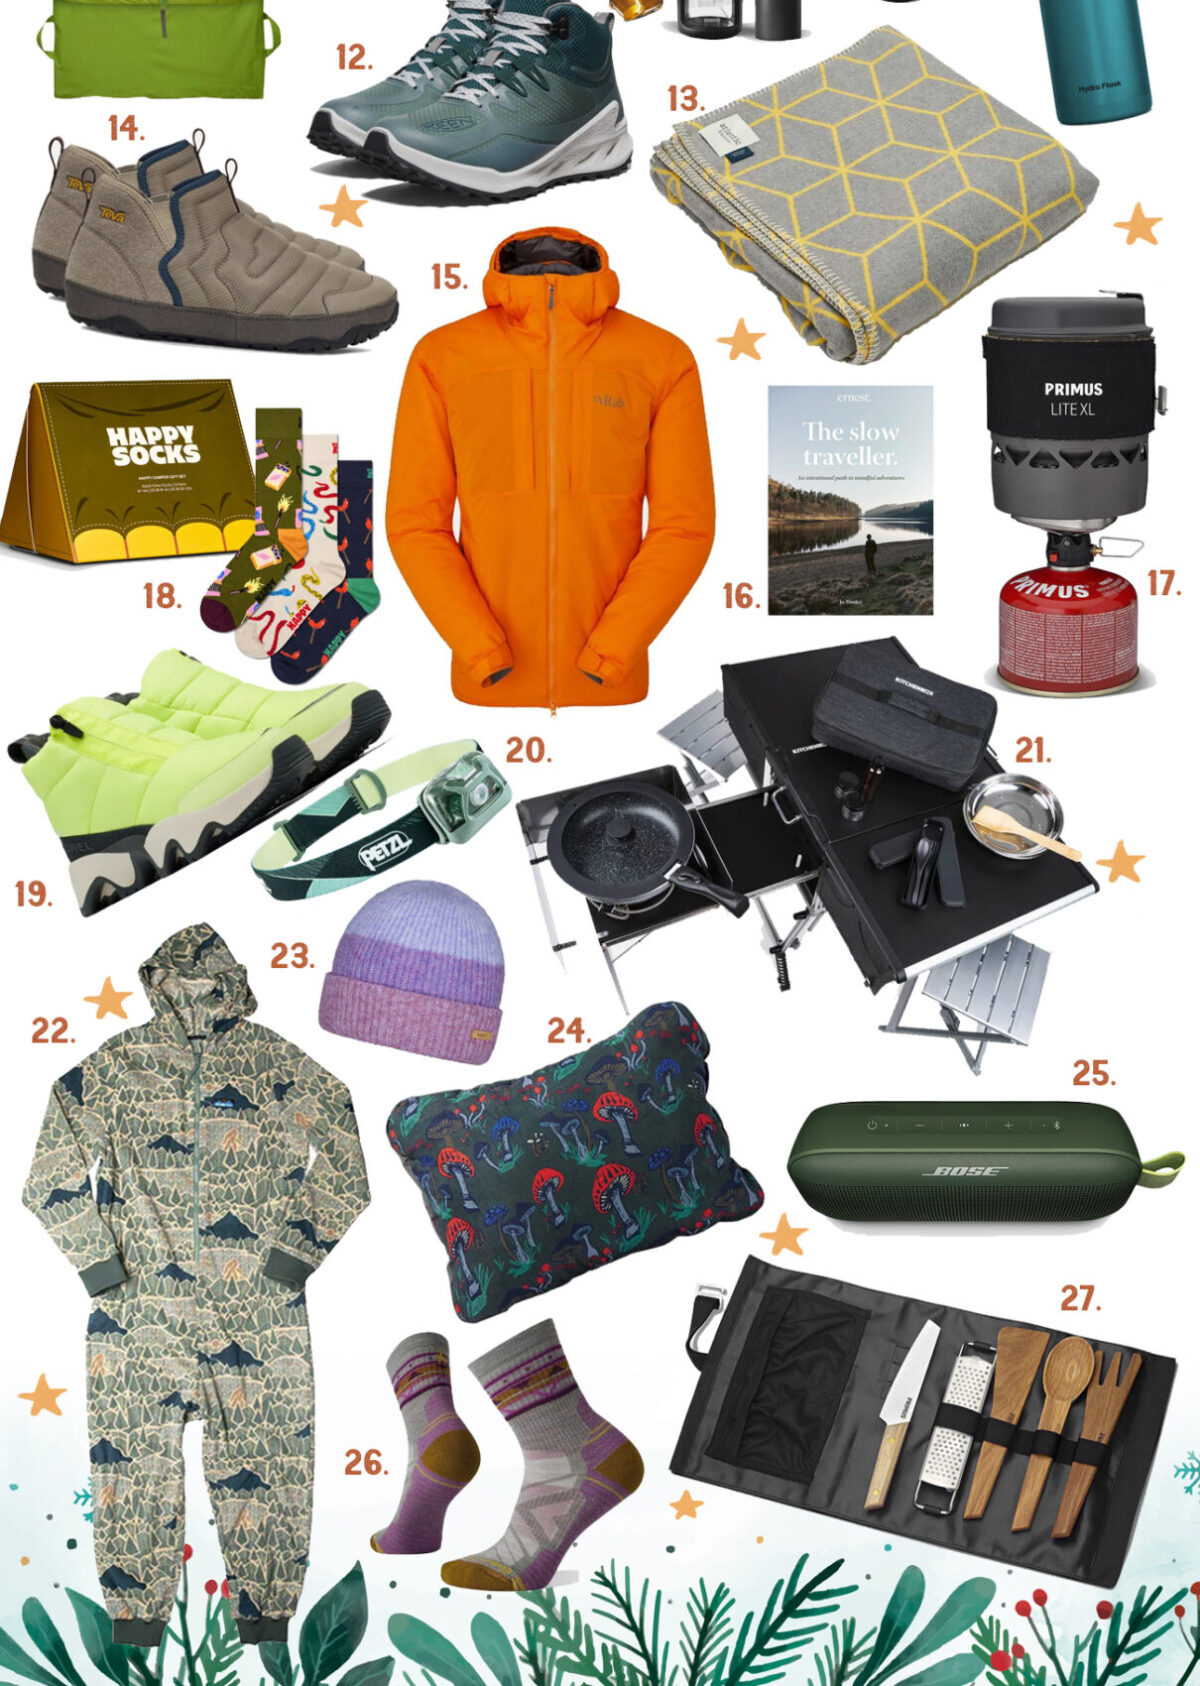 The Big 2203 Camping & Outdoor Christmas Gift Guide